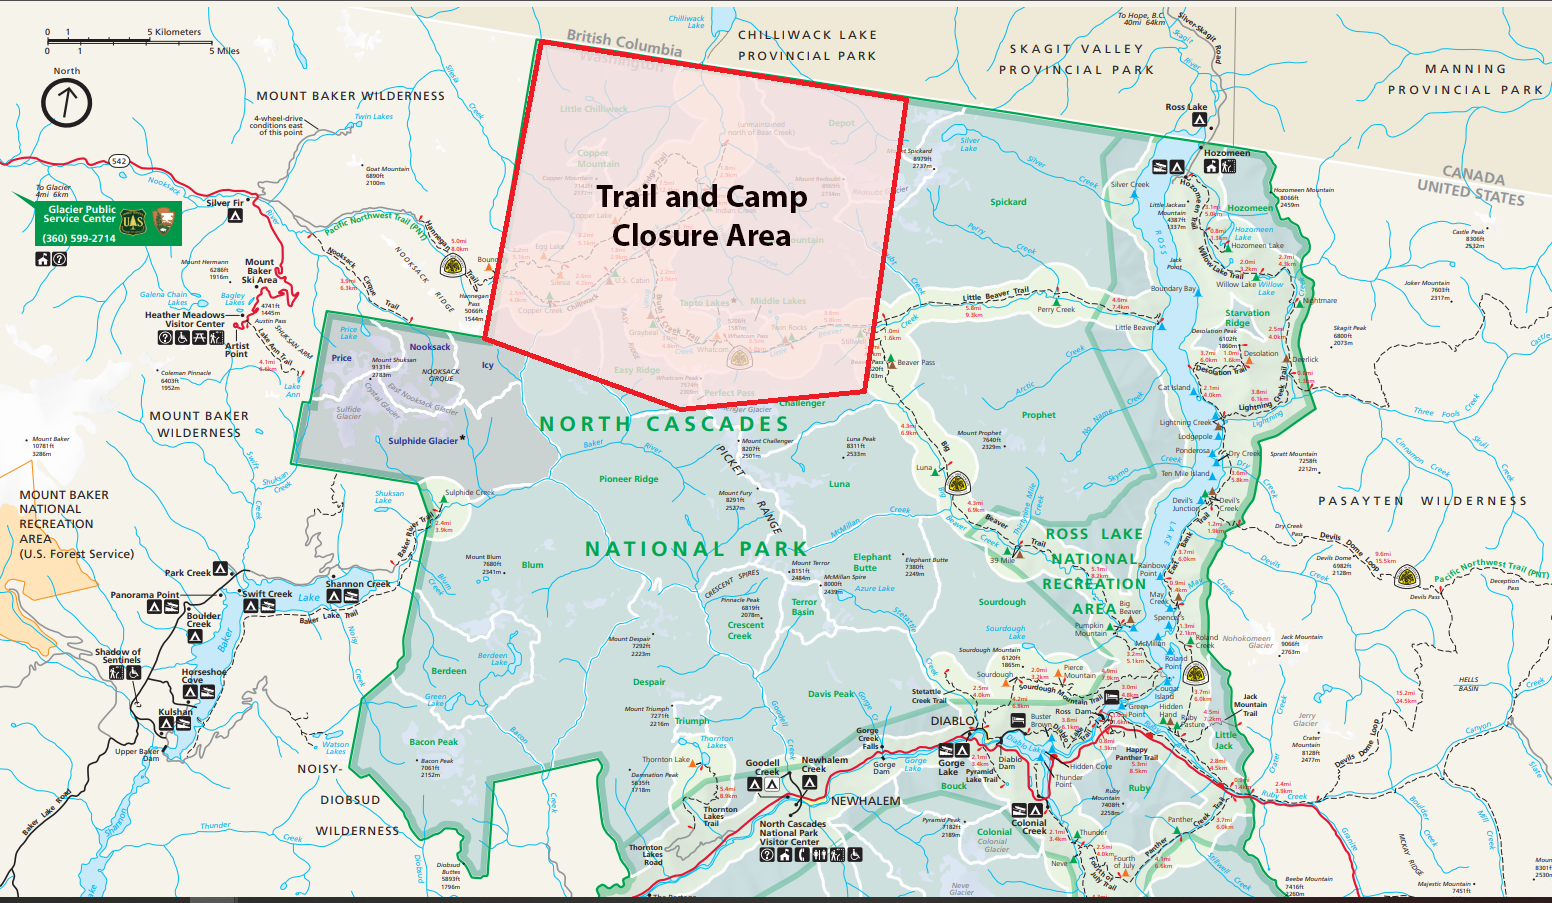 Park map showing trail and camp closure due to fire